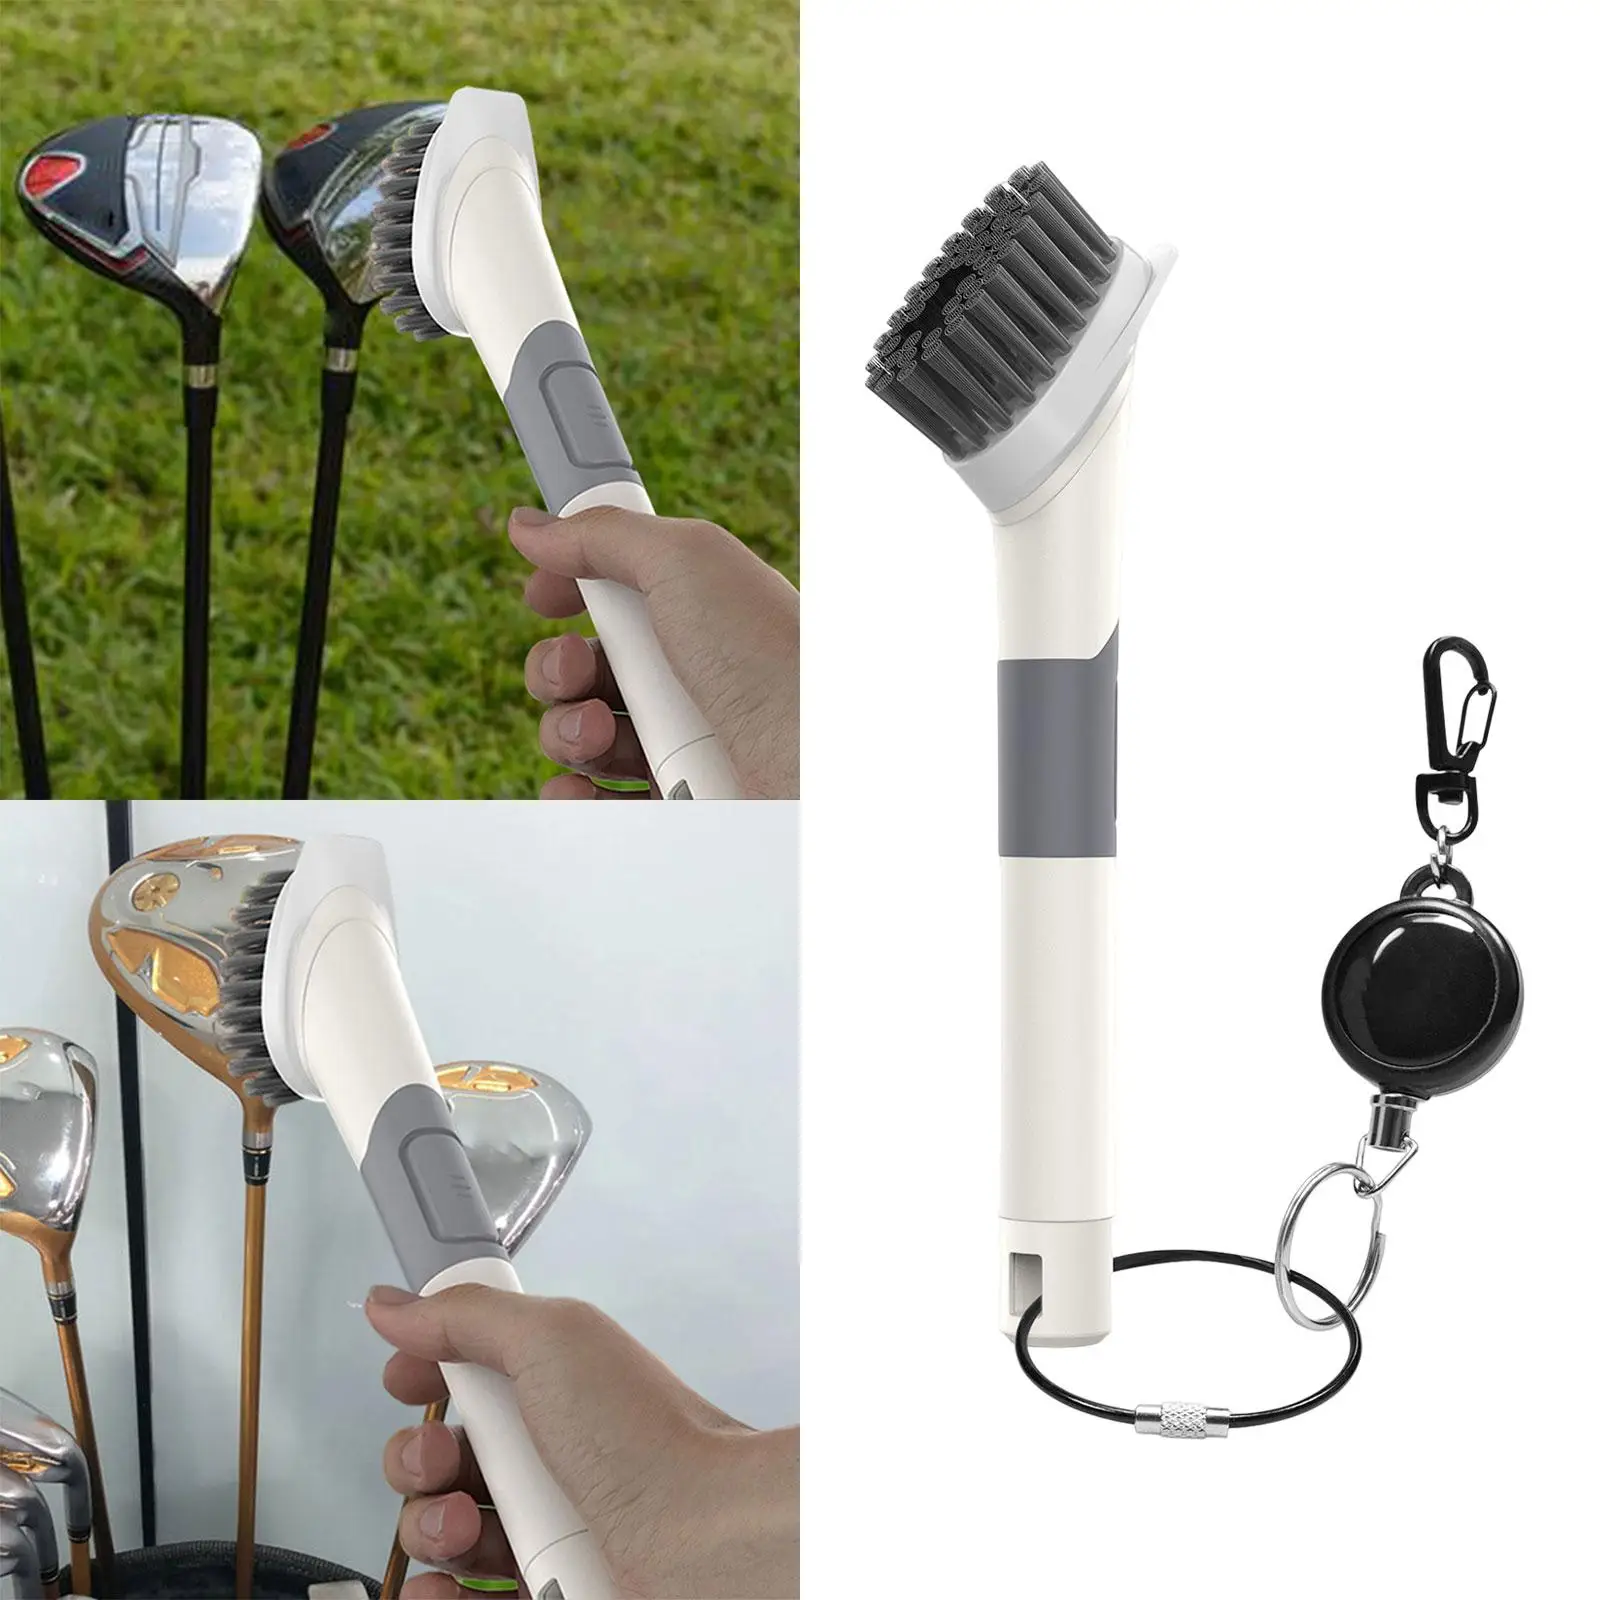 Golf Club Cleaner Cleaning Brushes Easy Carry Aluminum Carabiner for Cleaning Dirty Clubs Groove Comfort Hand Grip for Men Gift